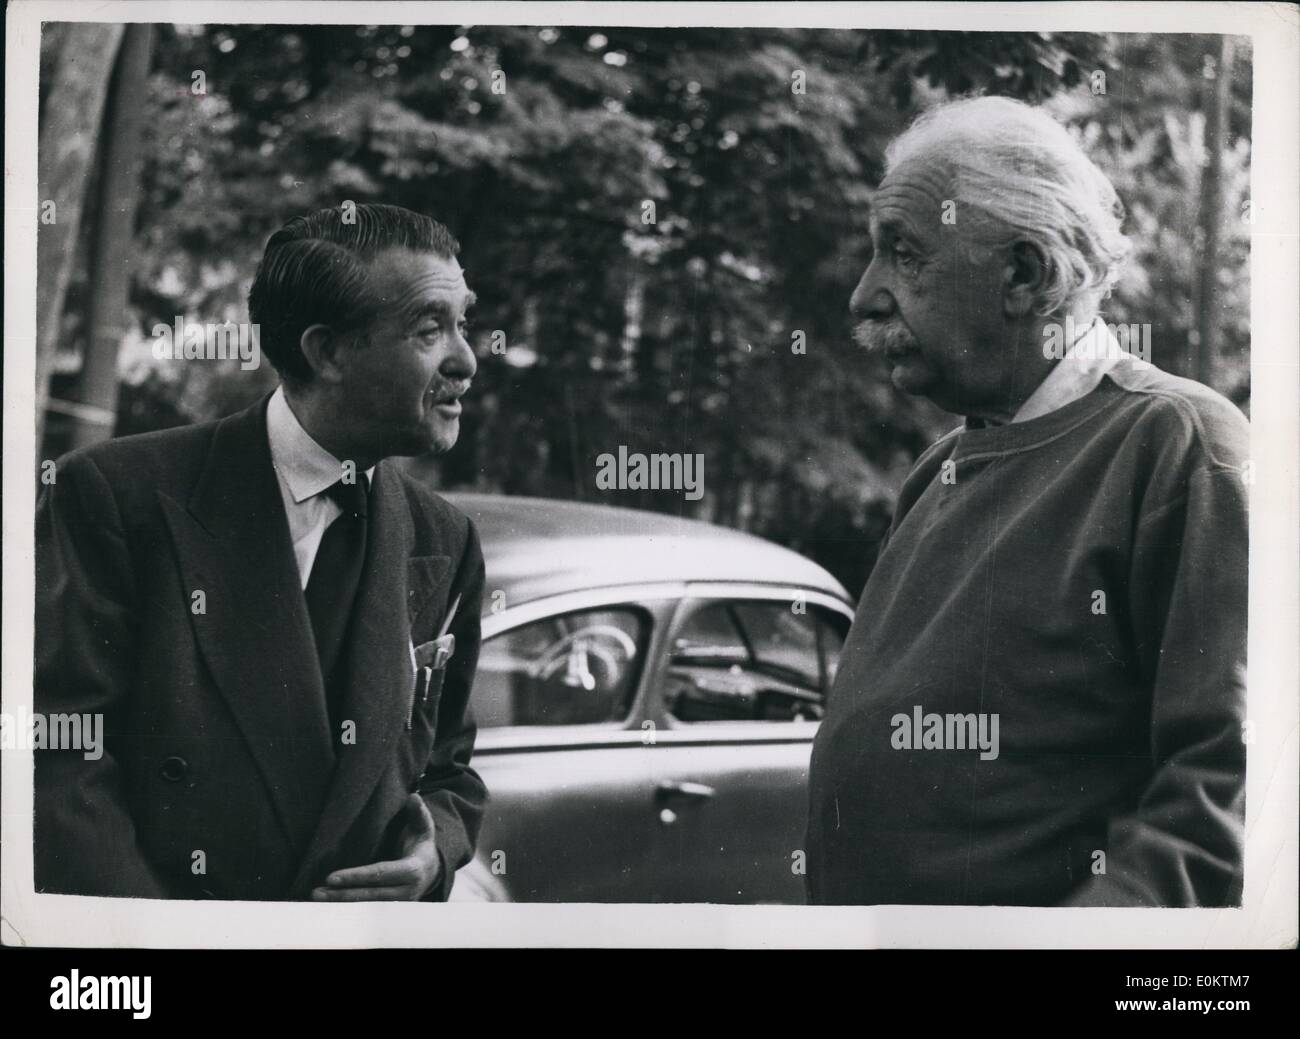 Jan 1, 1950 - The G.O.M of Princeton: No amount of persuasion would make professor Einstein give an interview. He is pleased to Stock Photo